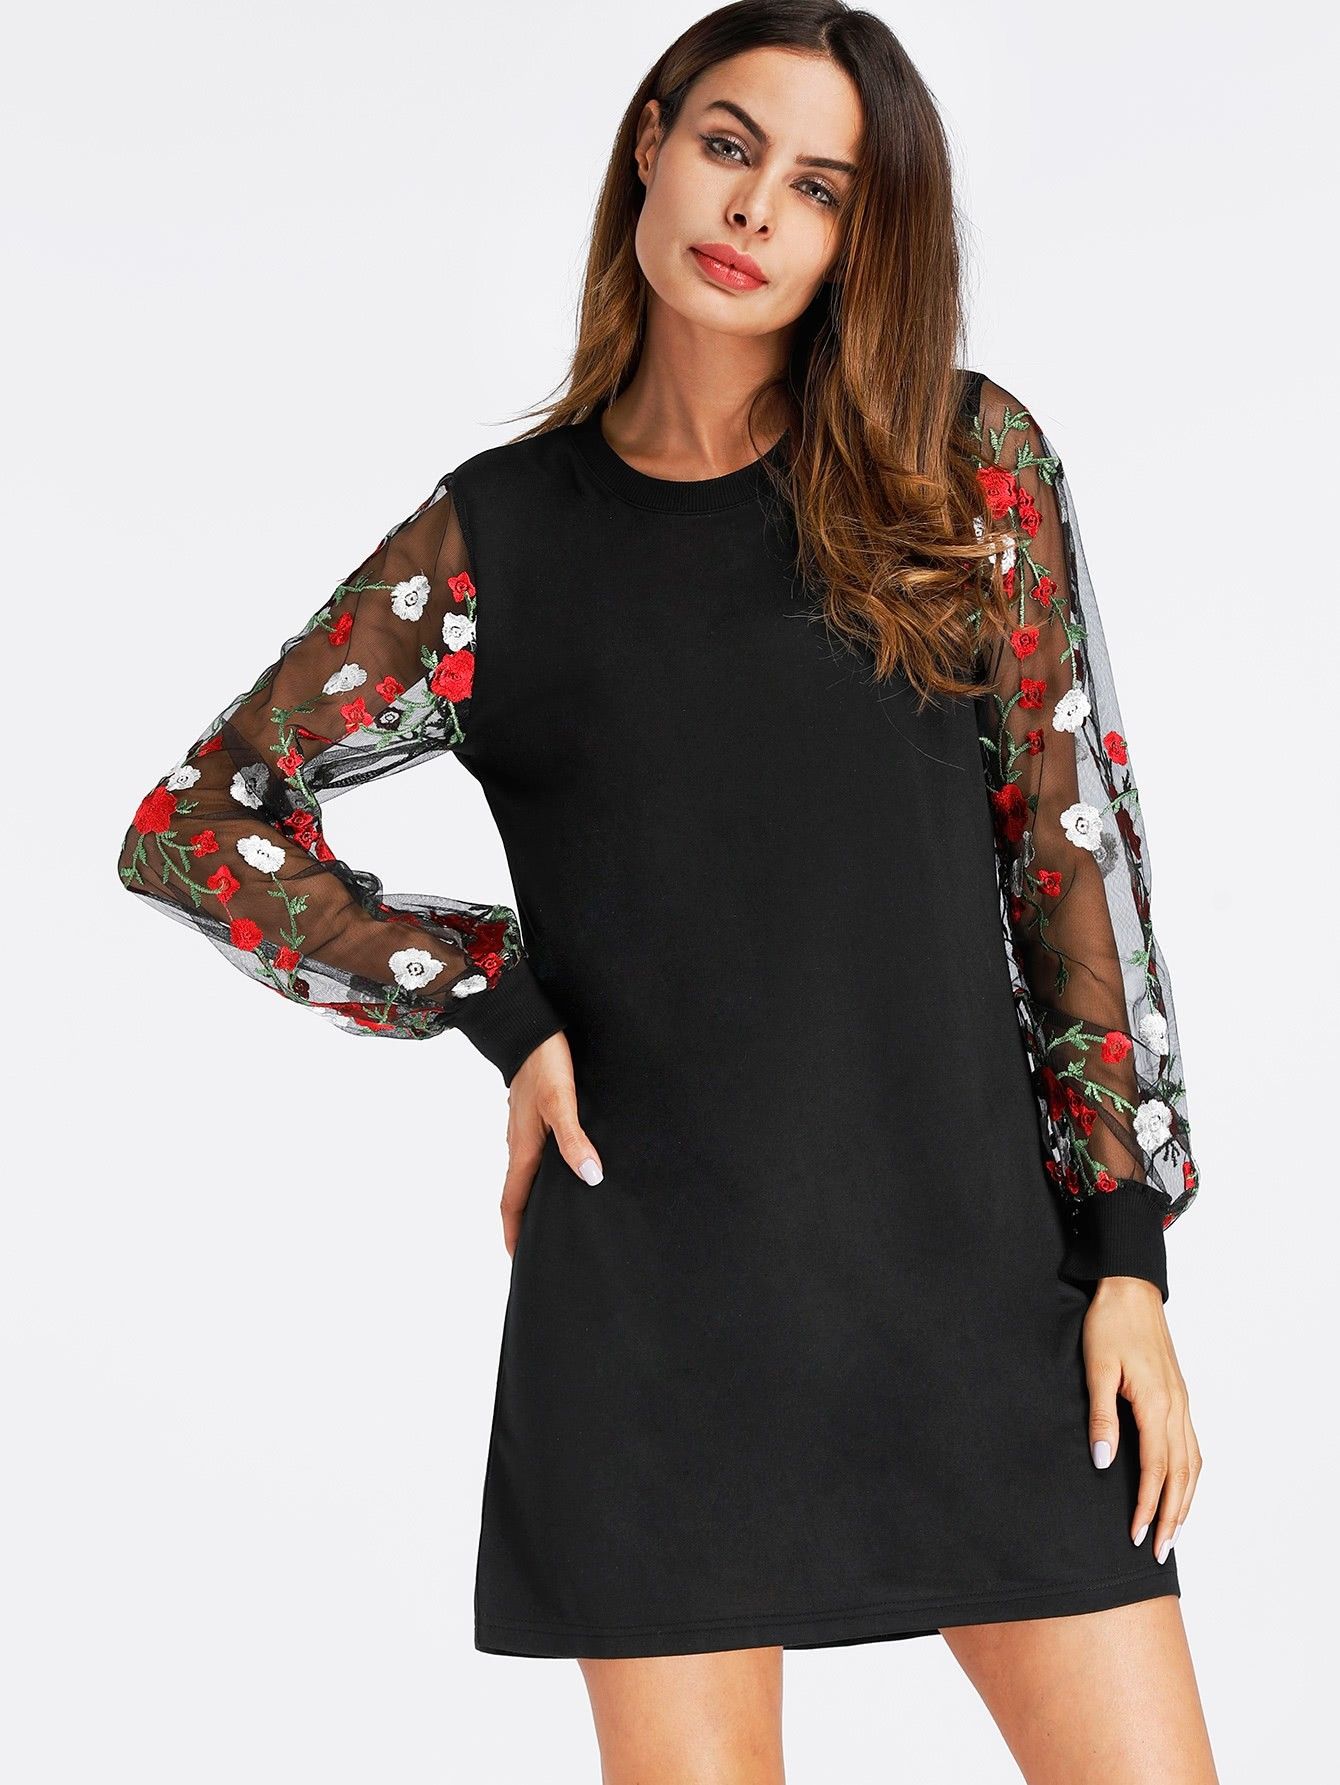 Floral Embroidered Lace Panel Dress | SHEIN